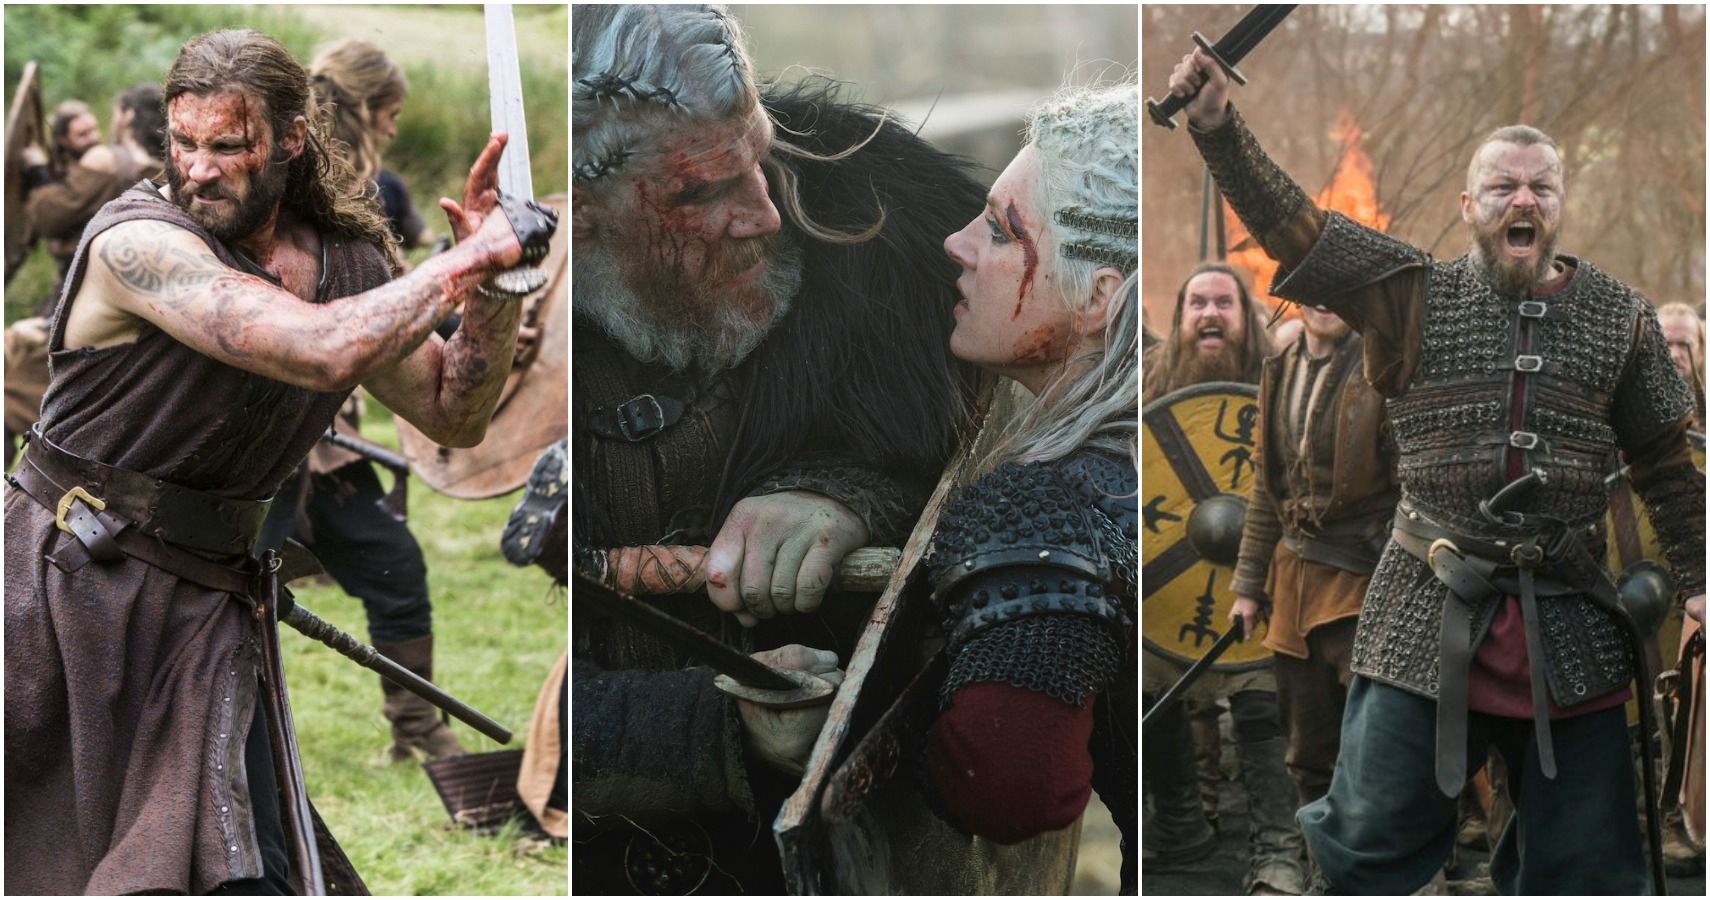 Vikings is a show known for its brutal war scenes, but... 